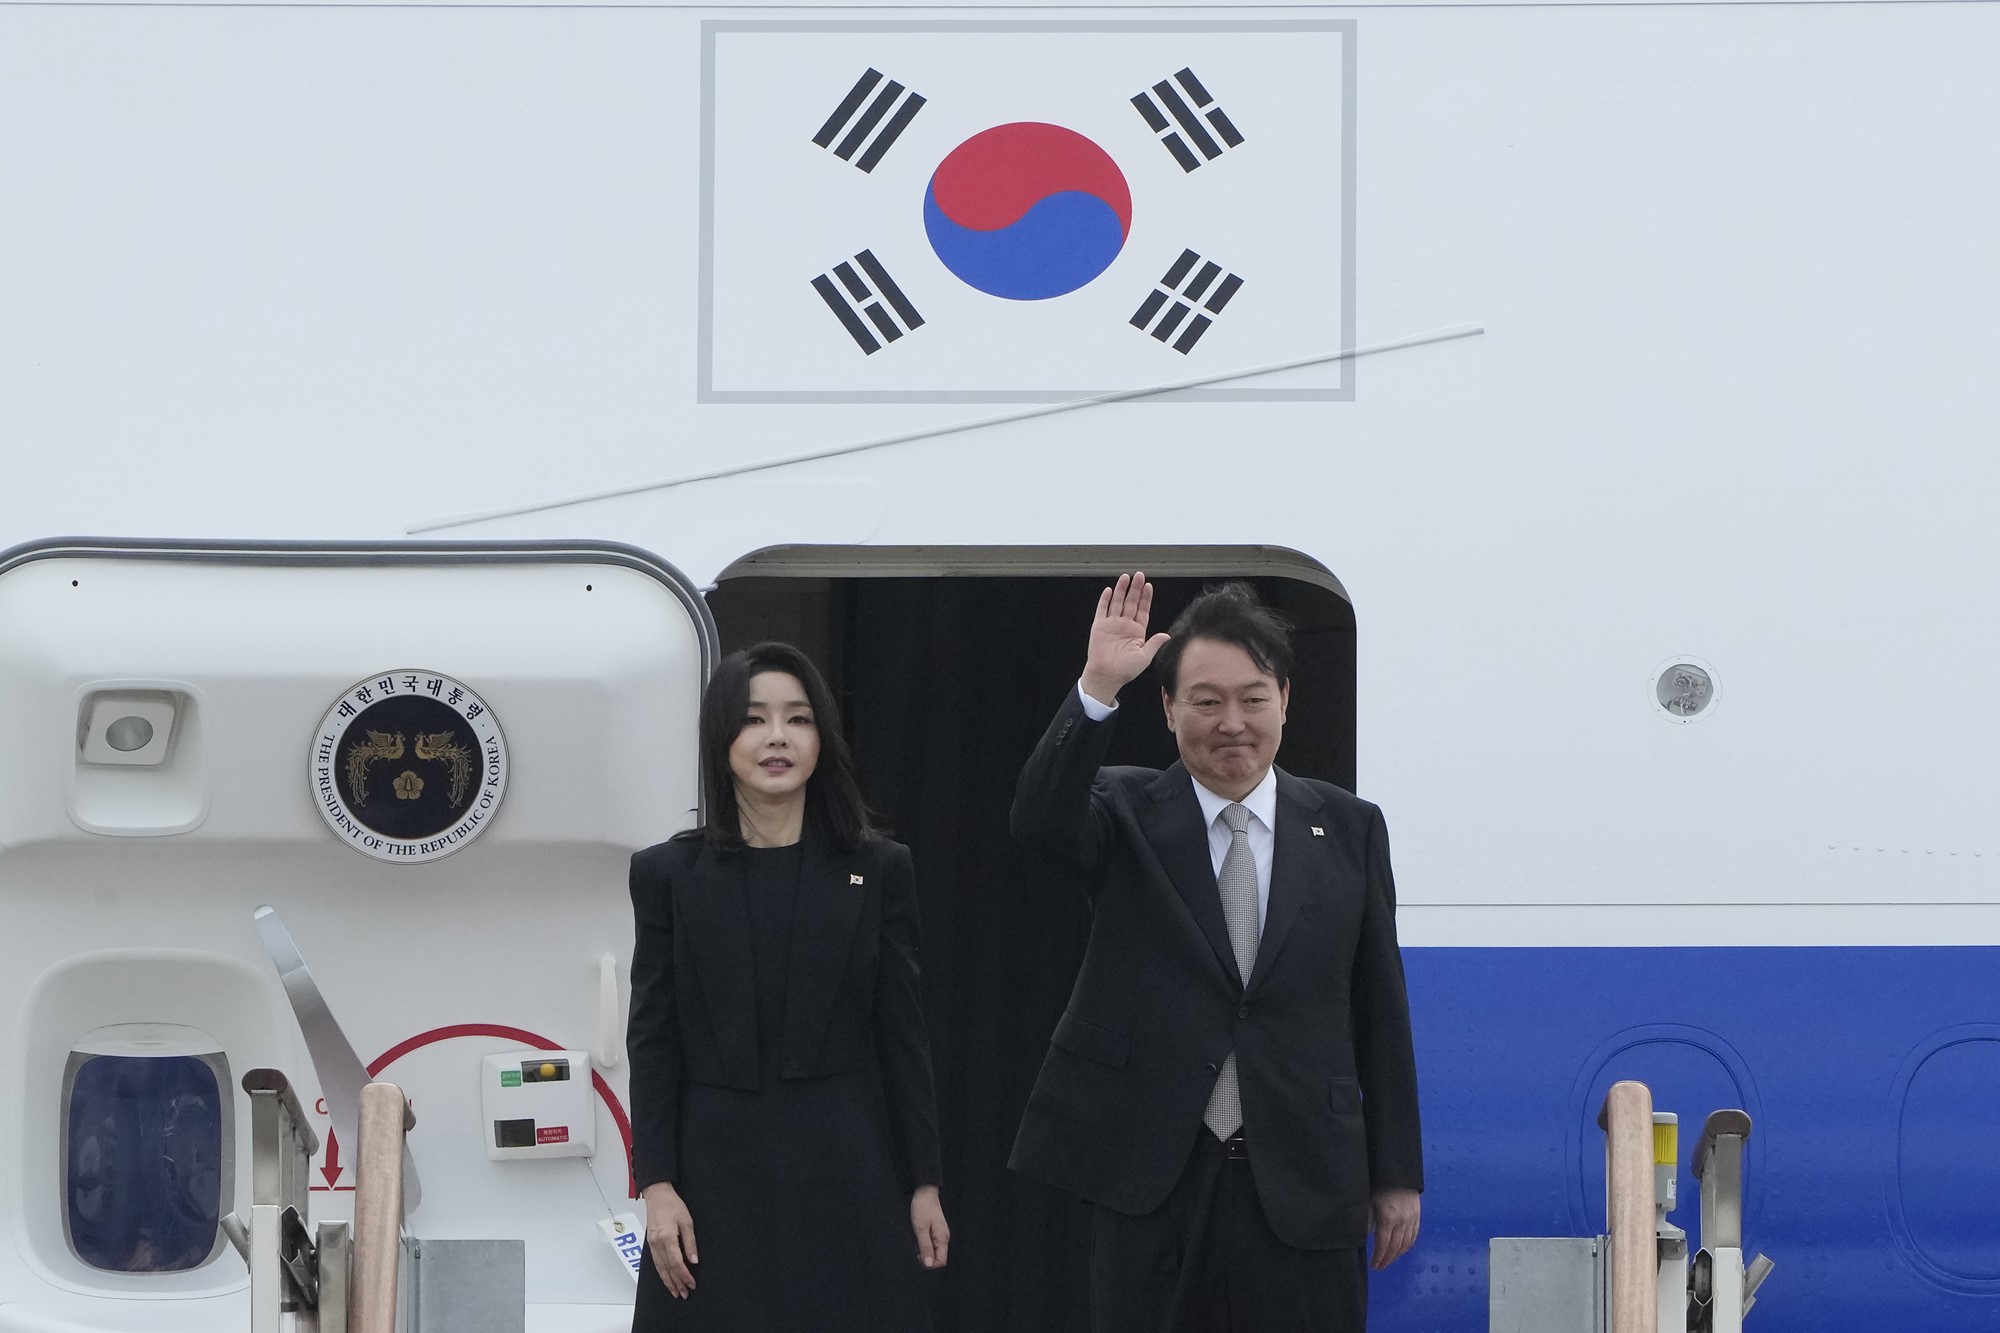 South Korean President Yoon Suk Yeol waves as his wife Kim Keon Hee boarding a plane with the South Korean flag on it